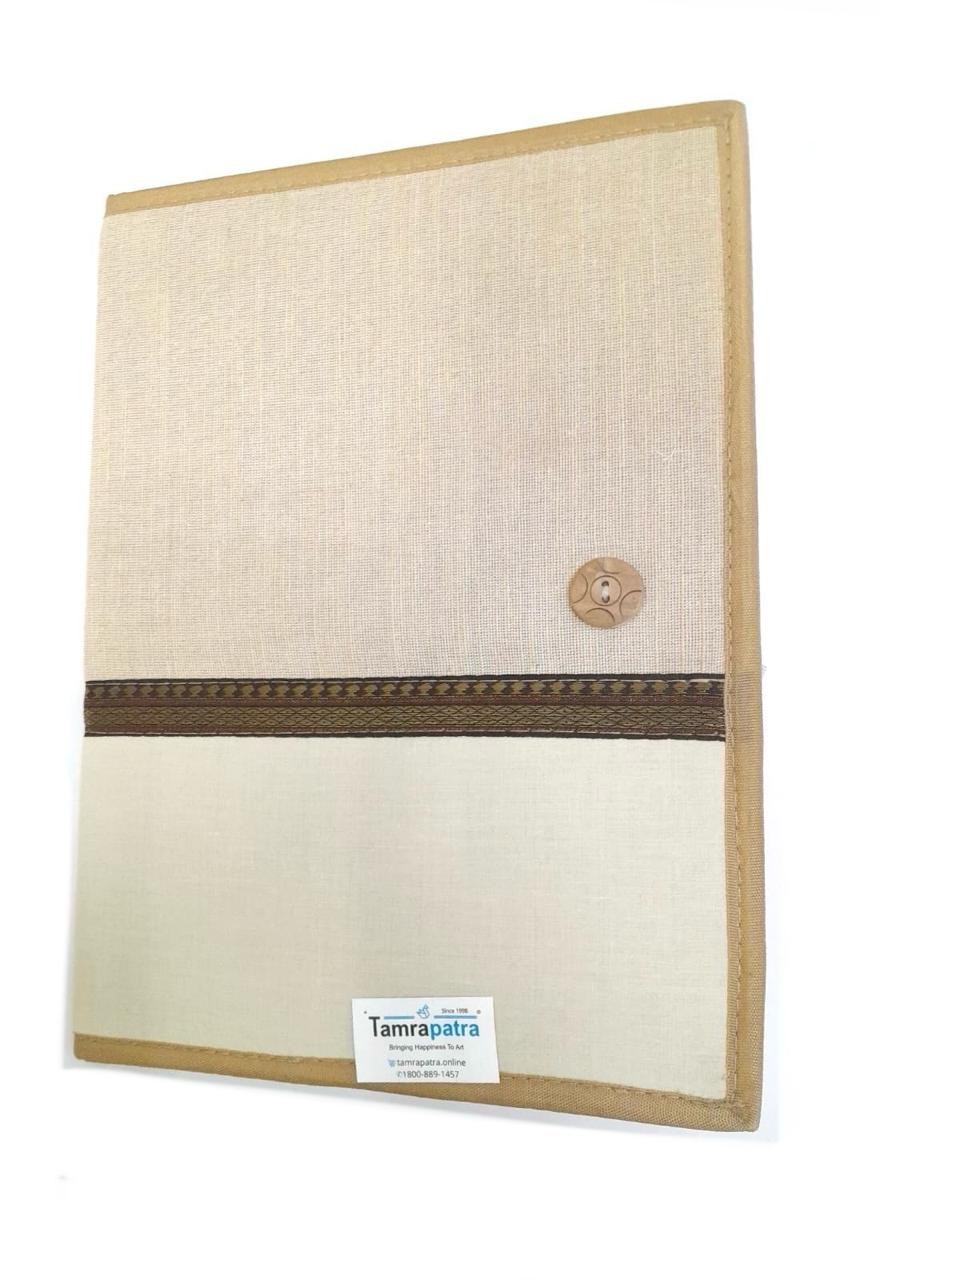 Unique Style Folder With Easy Button To Open Store Stationary Handmade Tamrapatra